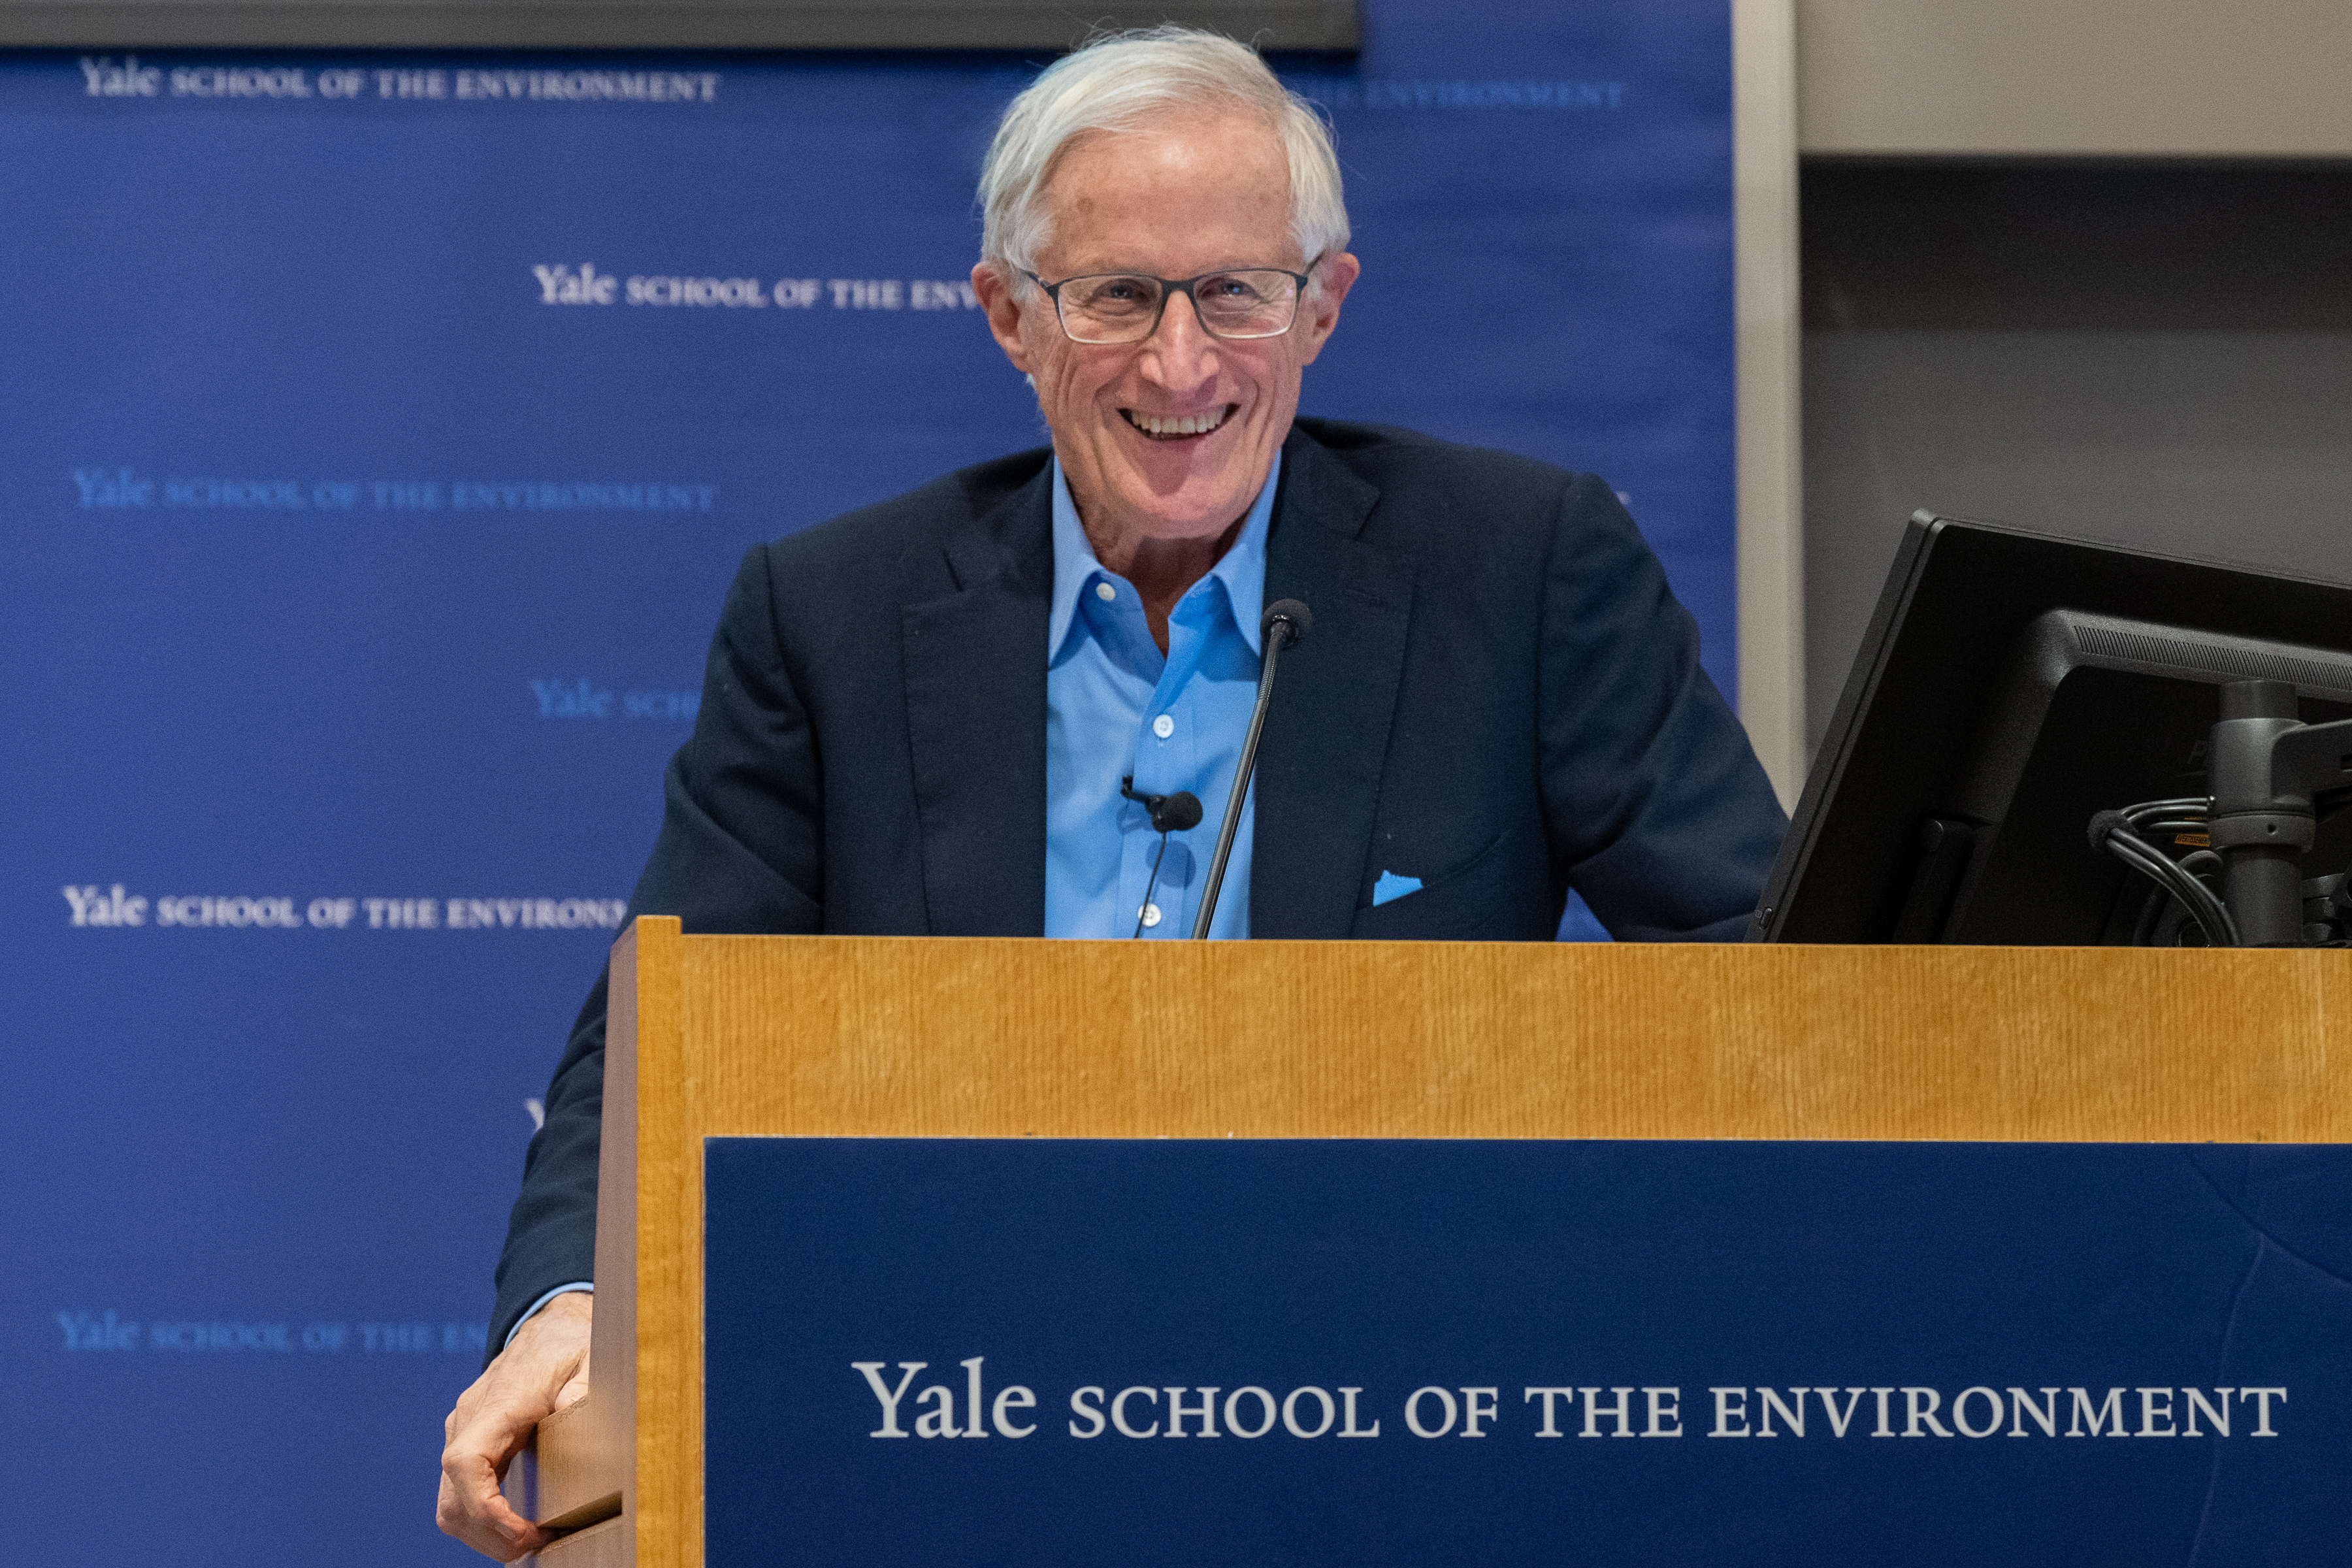 "Economist William Nordhaus speaks at the Yale, Climate, Environment, and Economic Growth Conference"